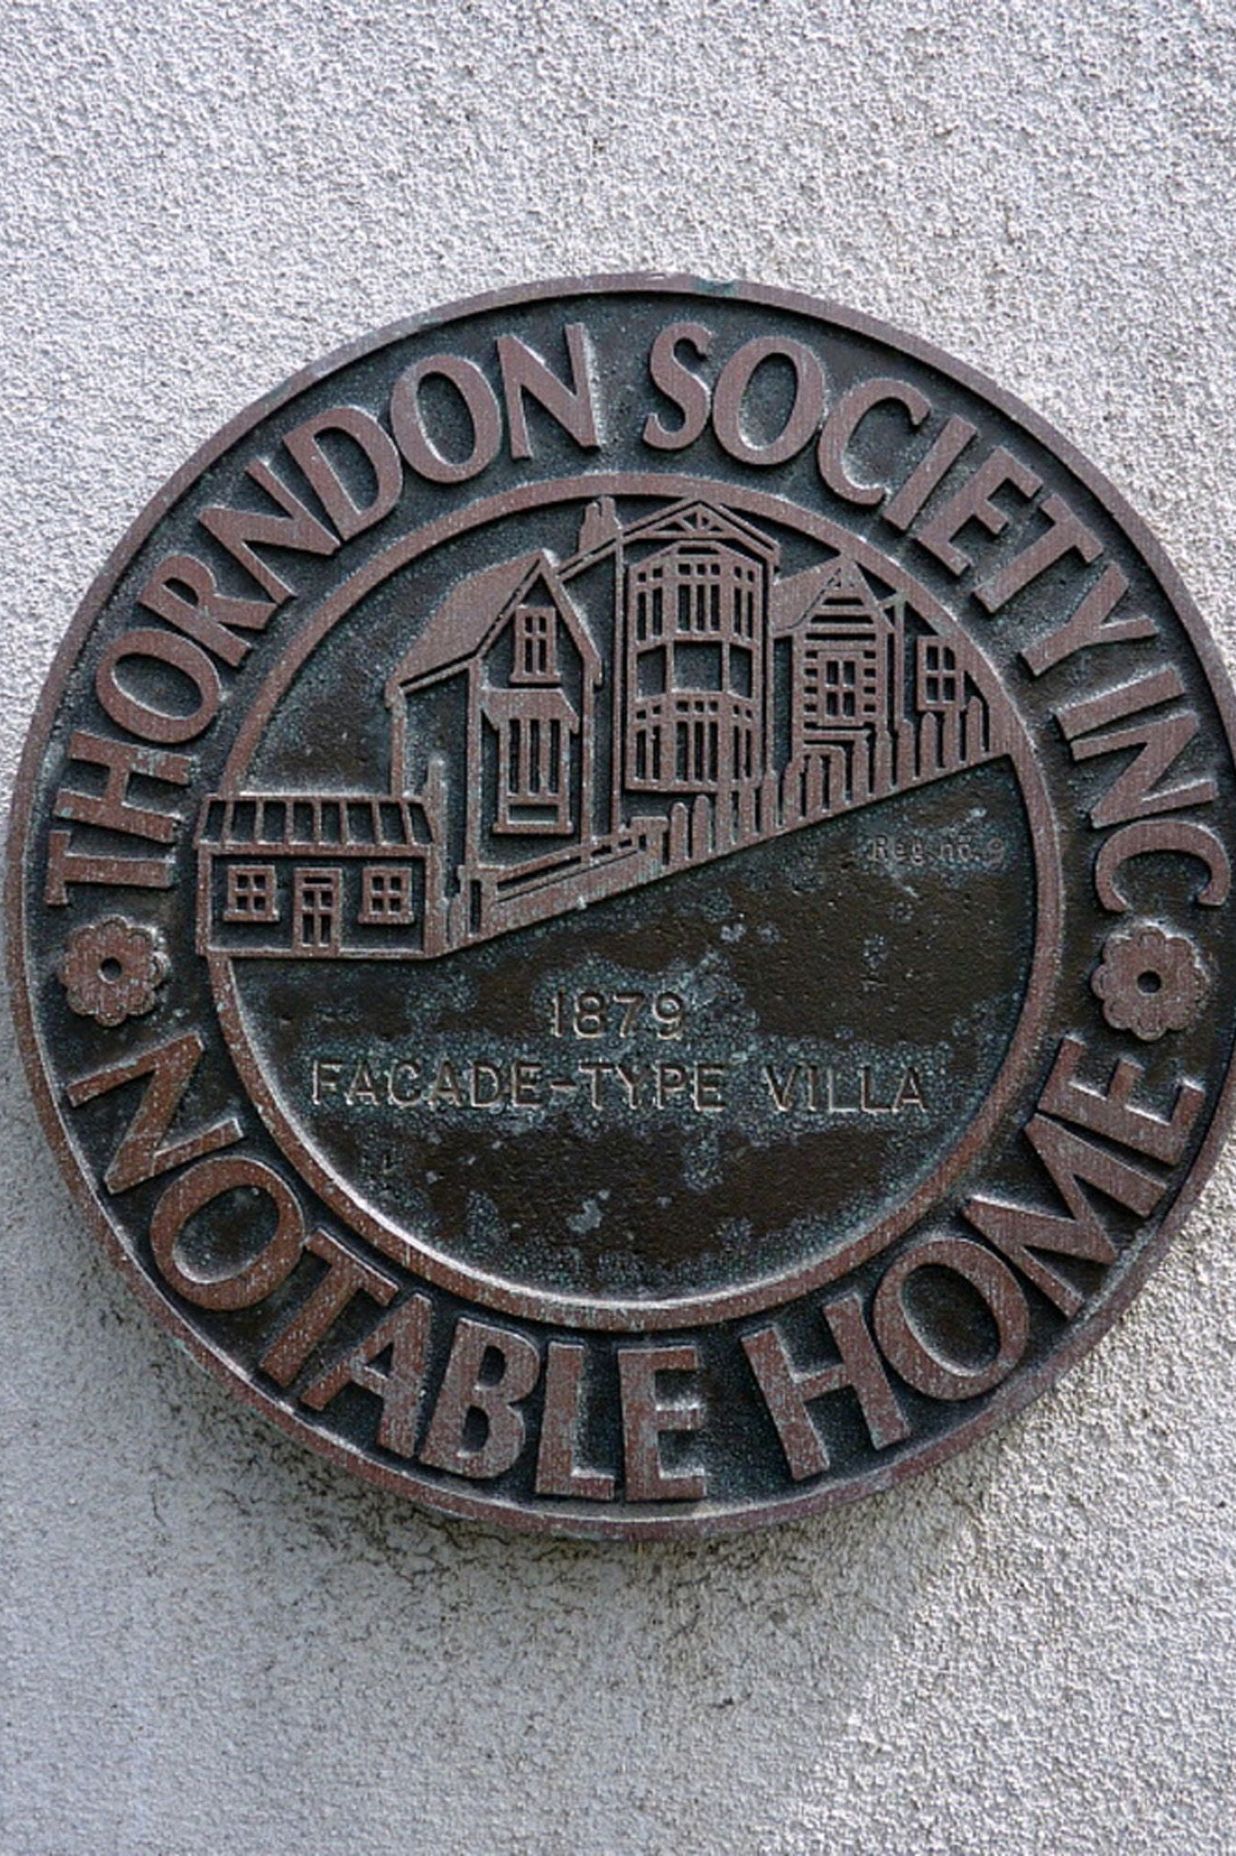 Thorndon Society Notable Home